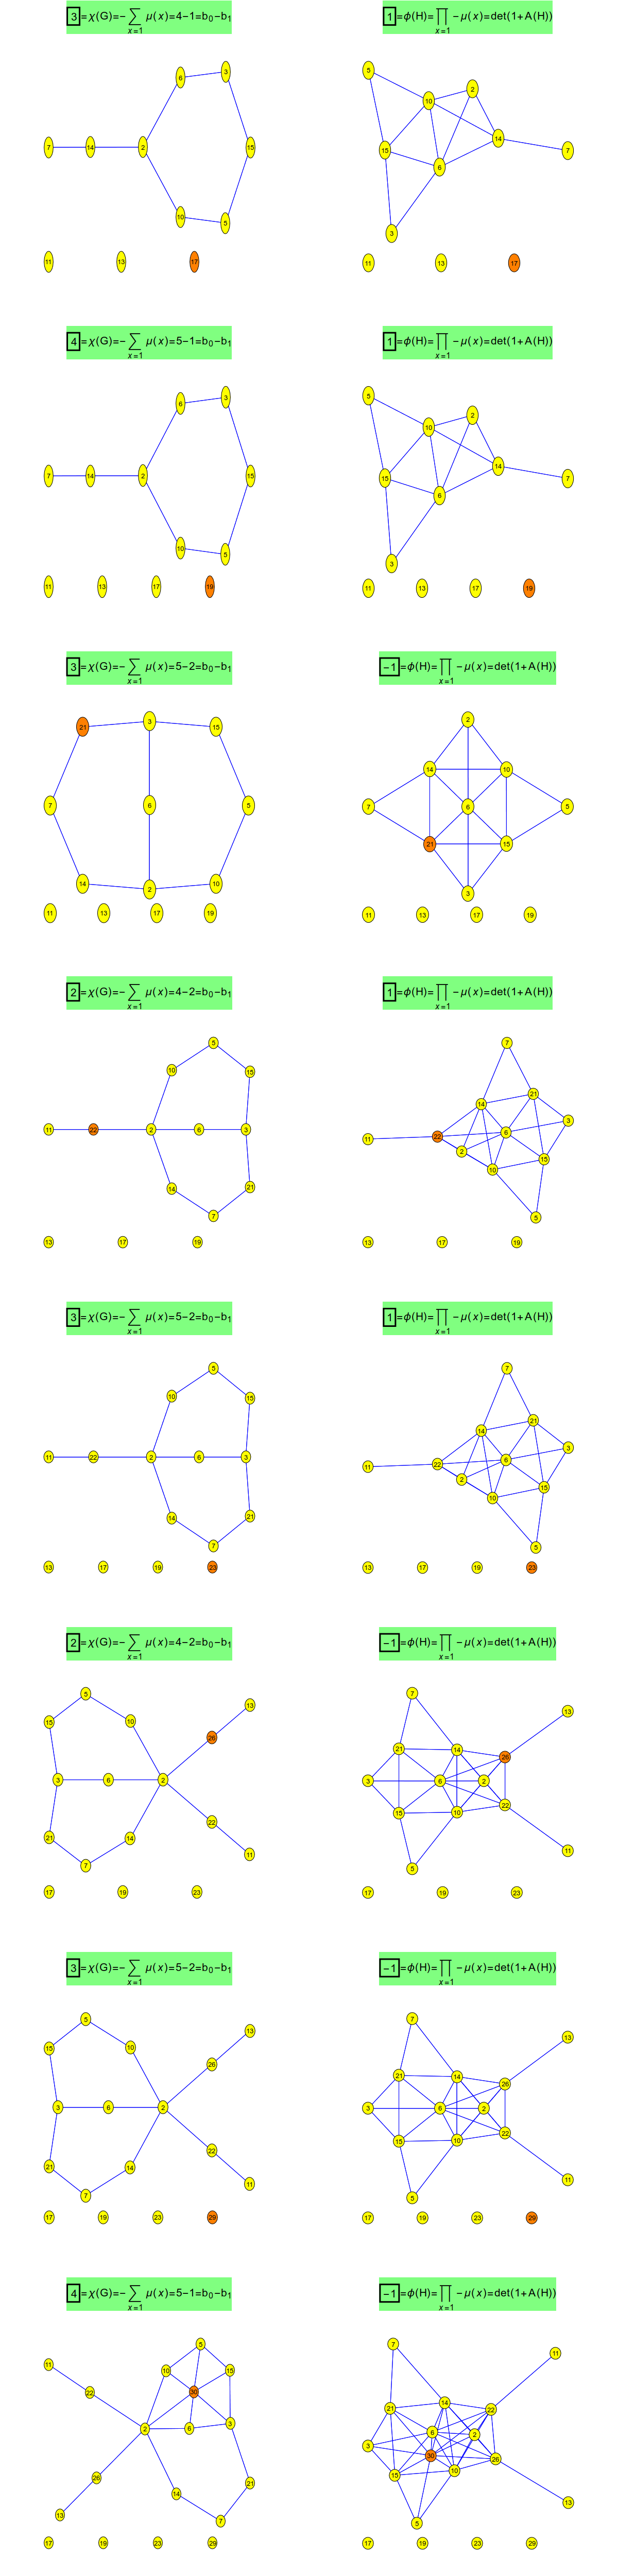 The Euler characteristic of prime graphs and the Fredholm characteristic of prime connection graphs